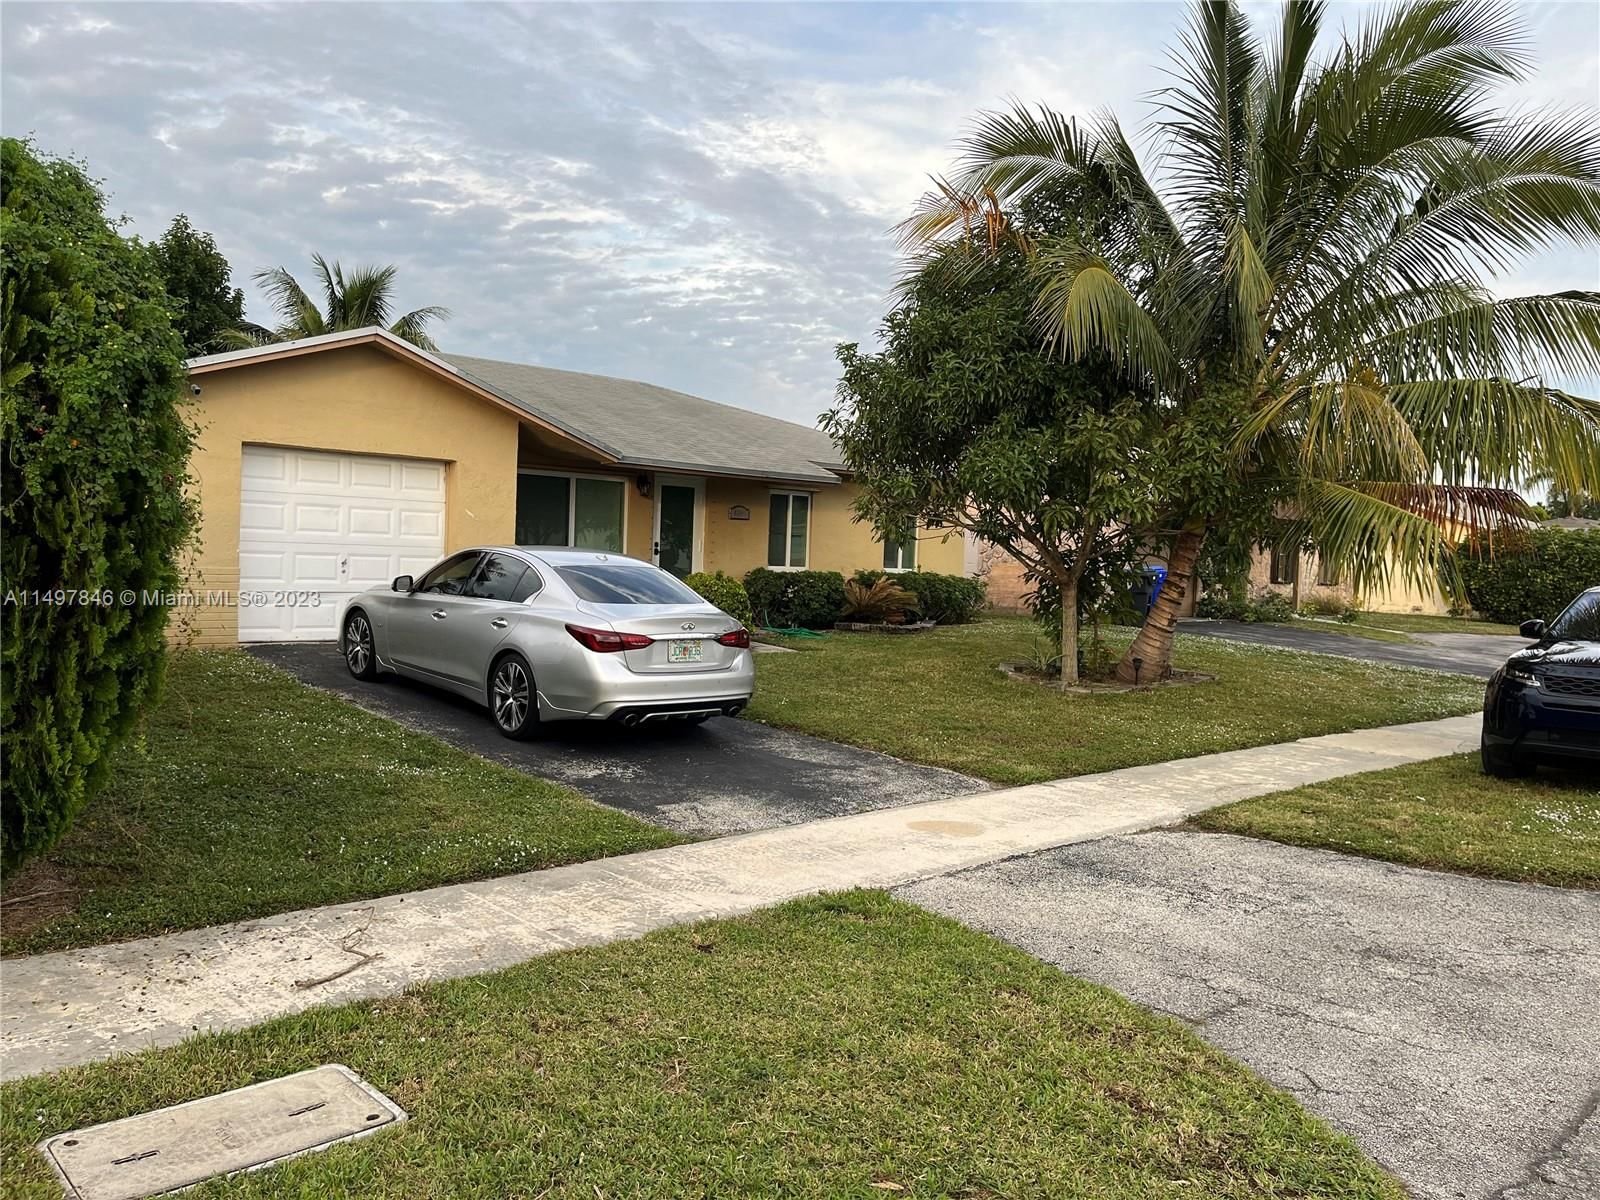 Real estate property located at 8241 9th Pl, Broward County, NORTH LAUDERDALE VILLAGE, North Lauderdale, FL